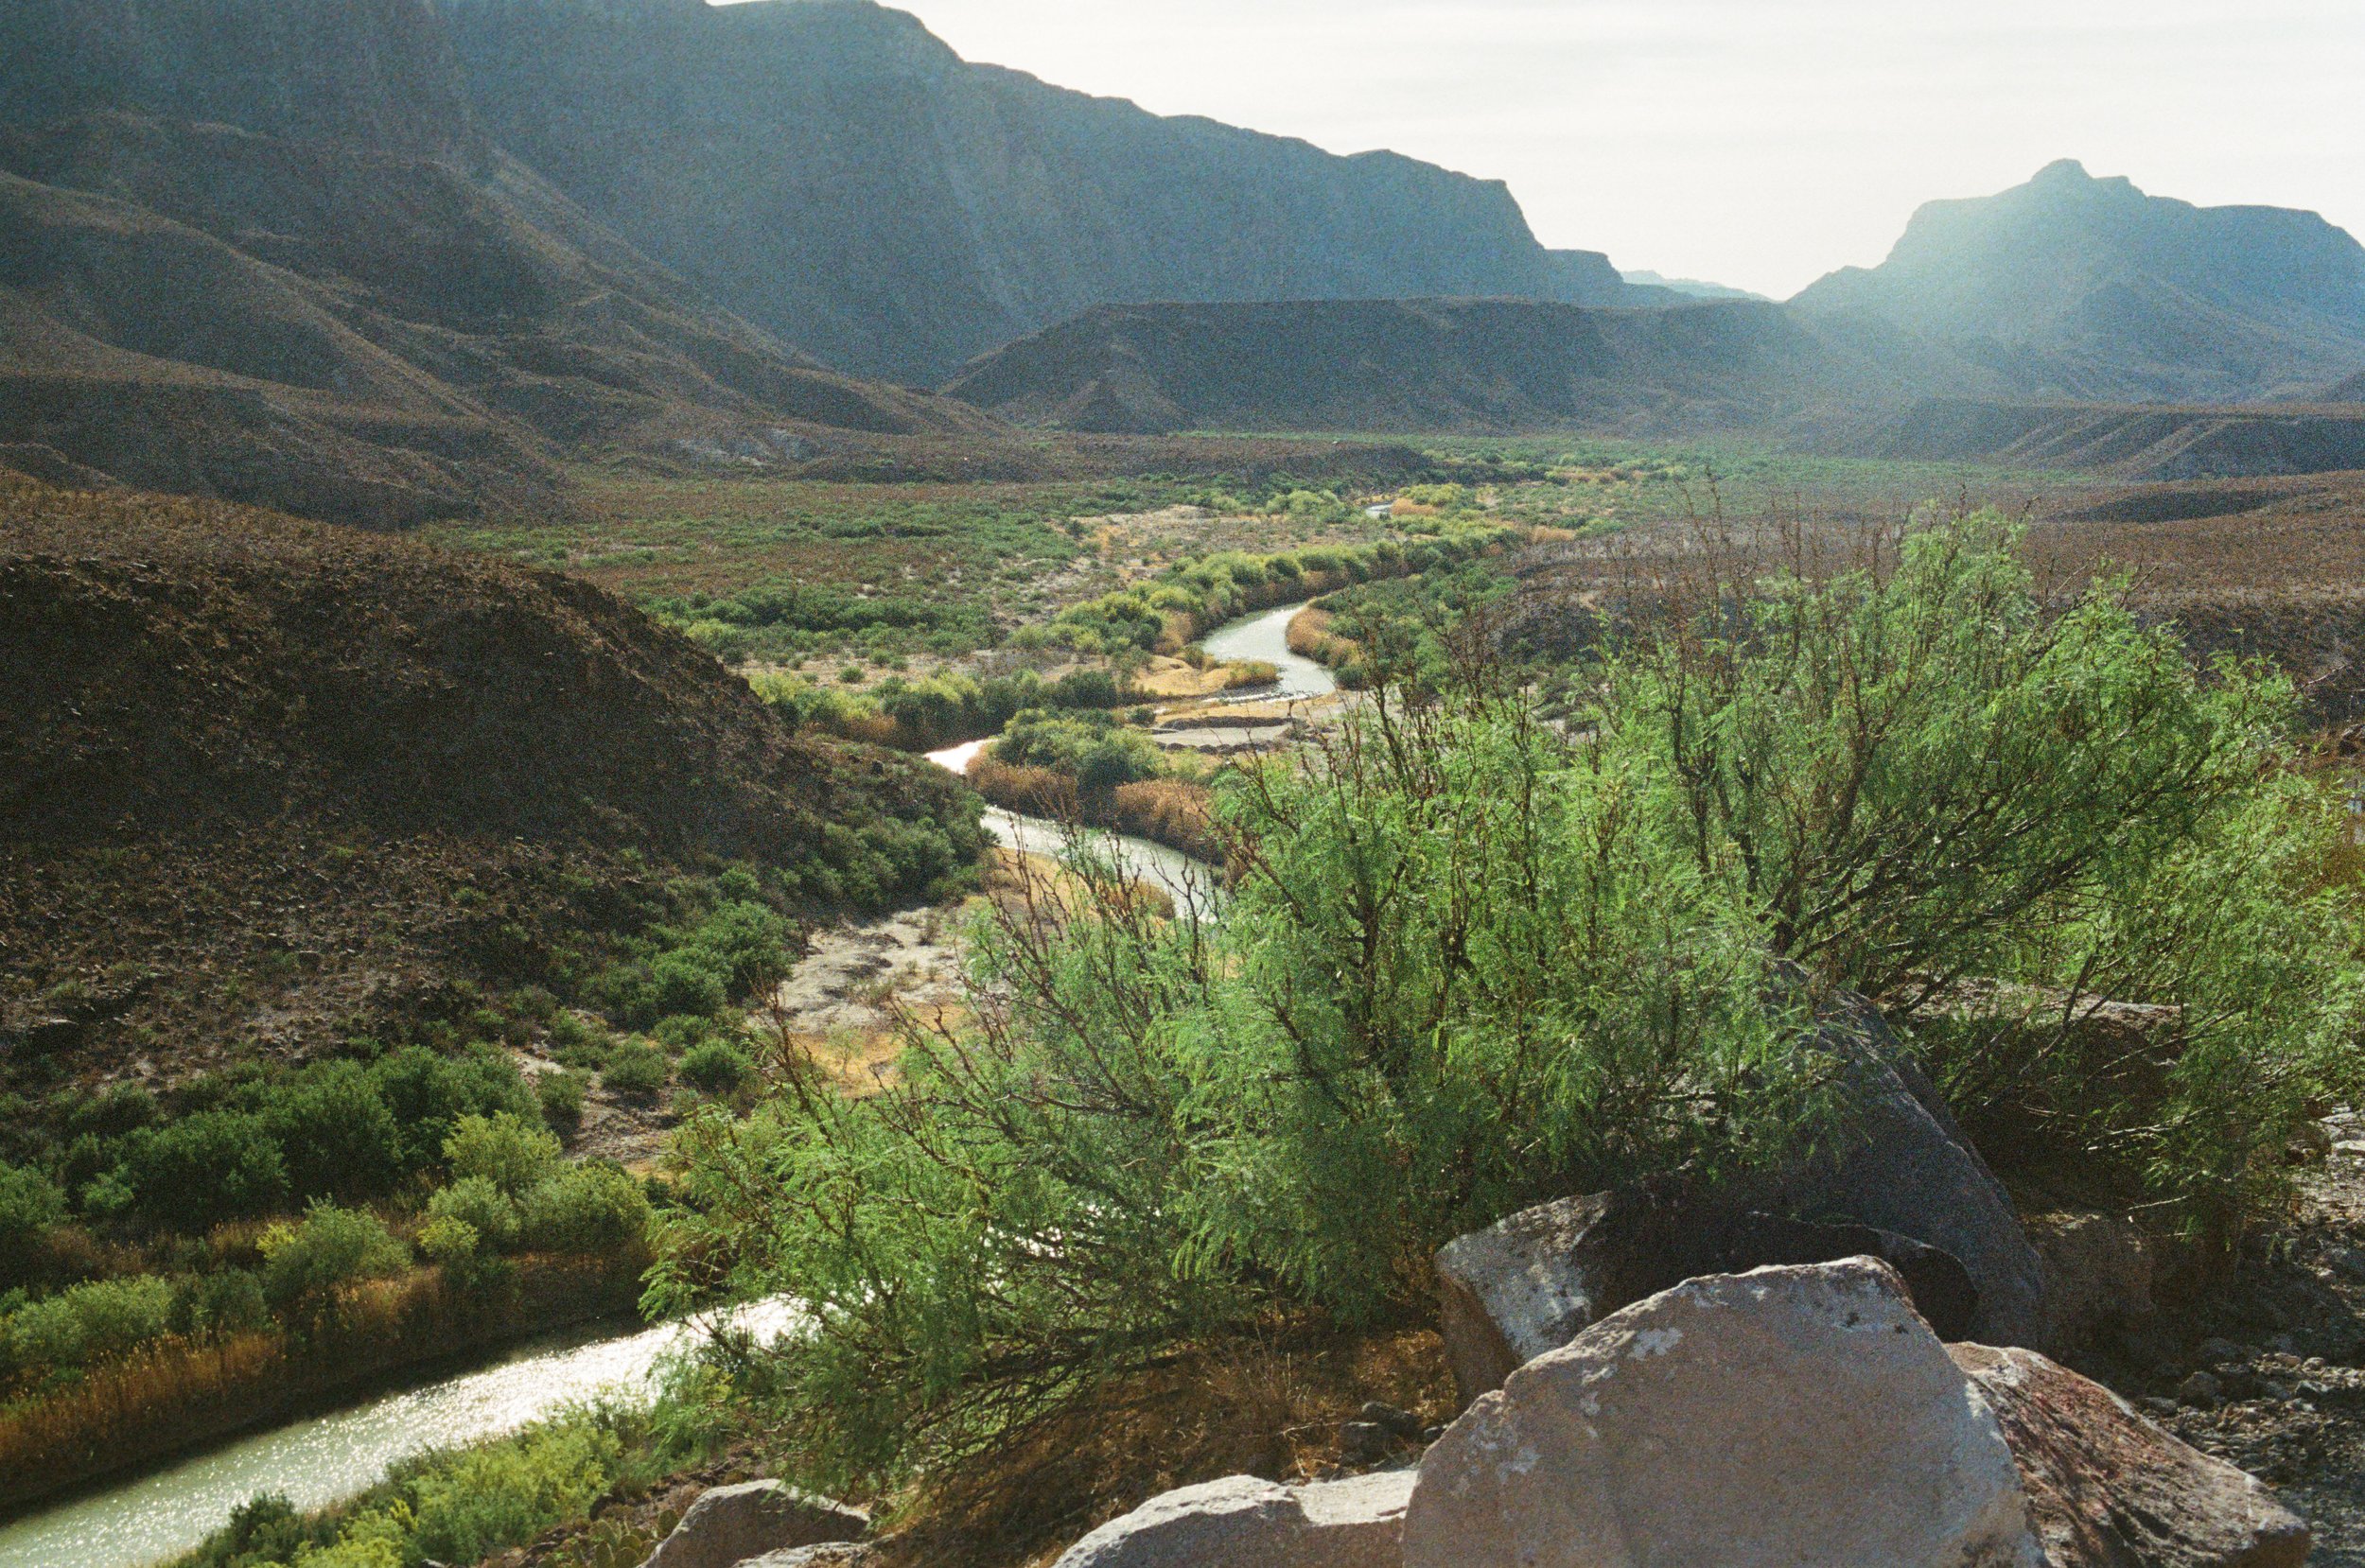 Big Bend Ranch State Park, TX - 2022